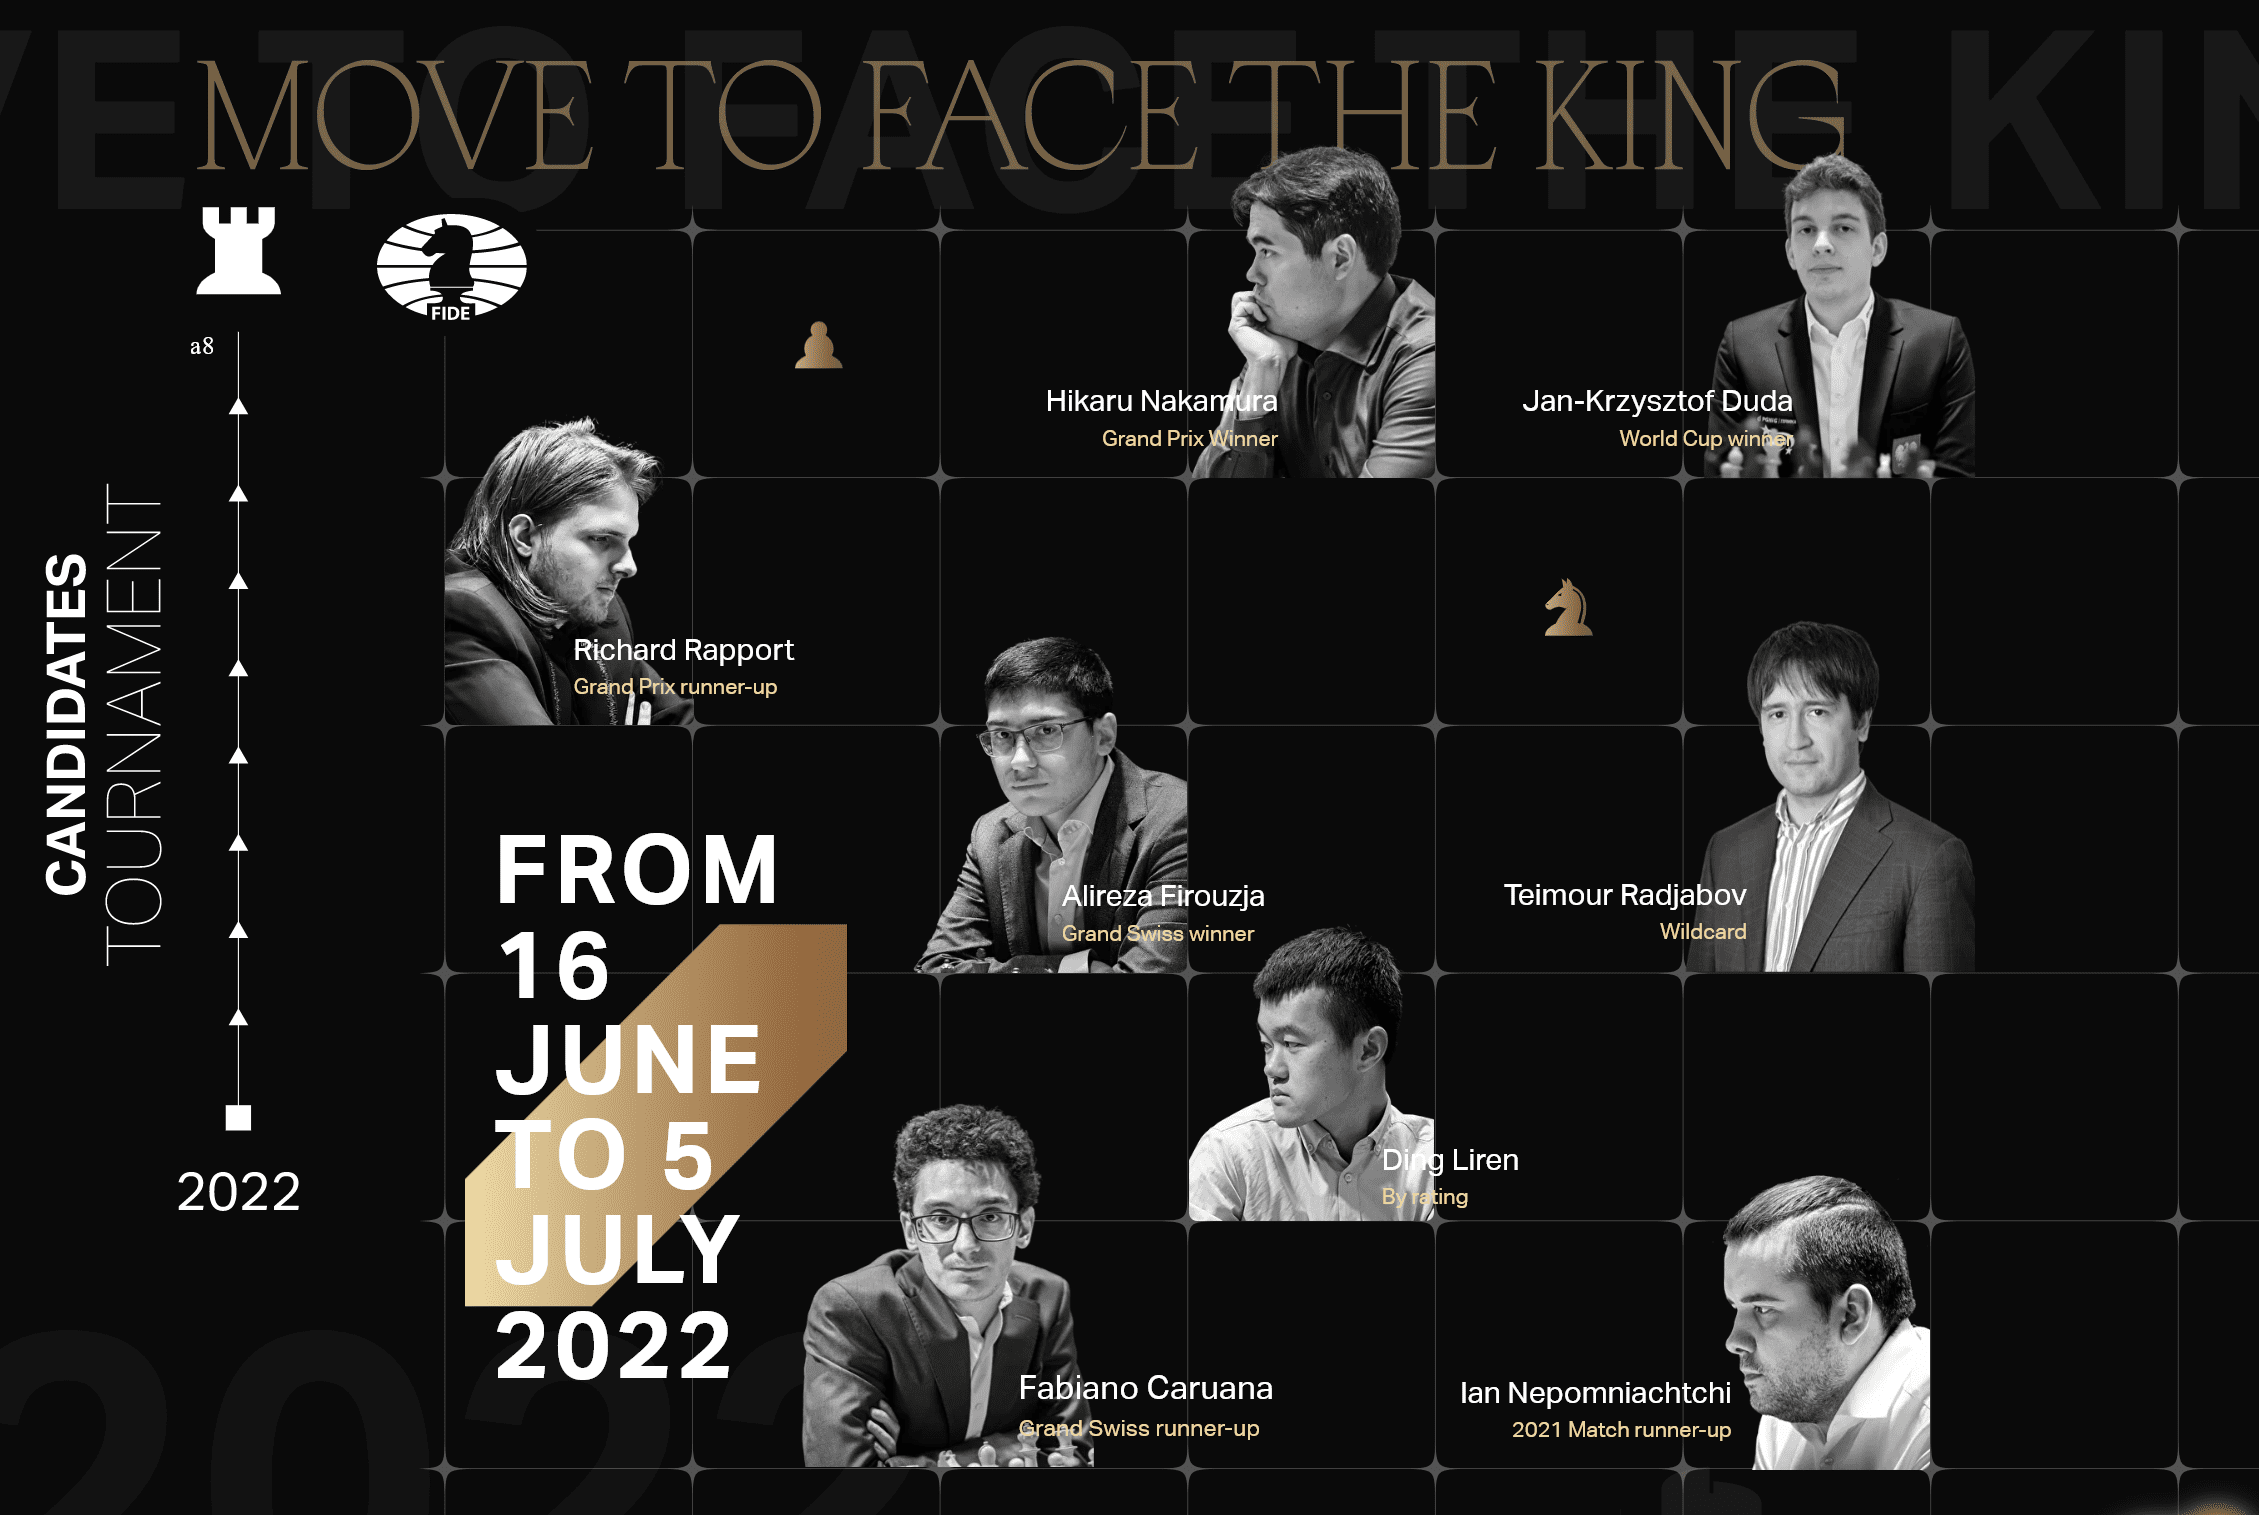 Qualification routes for the next Candidates Tournament : r/chess